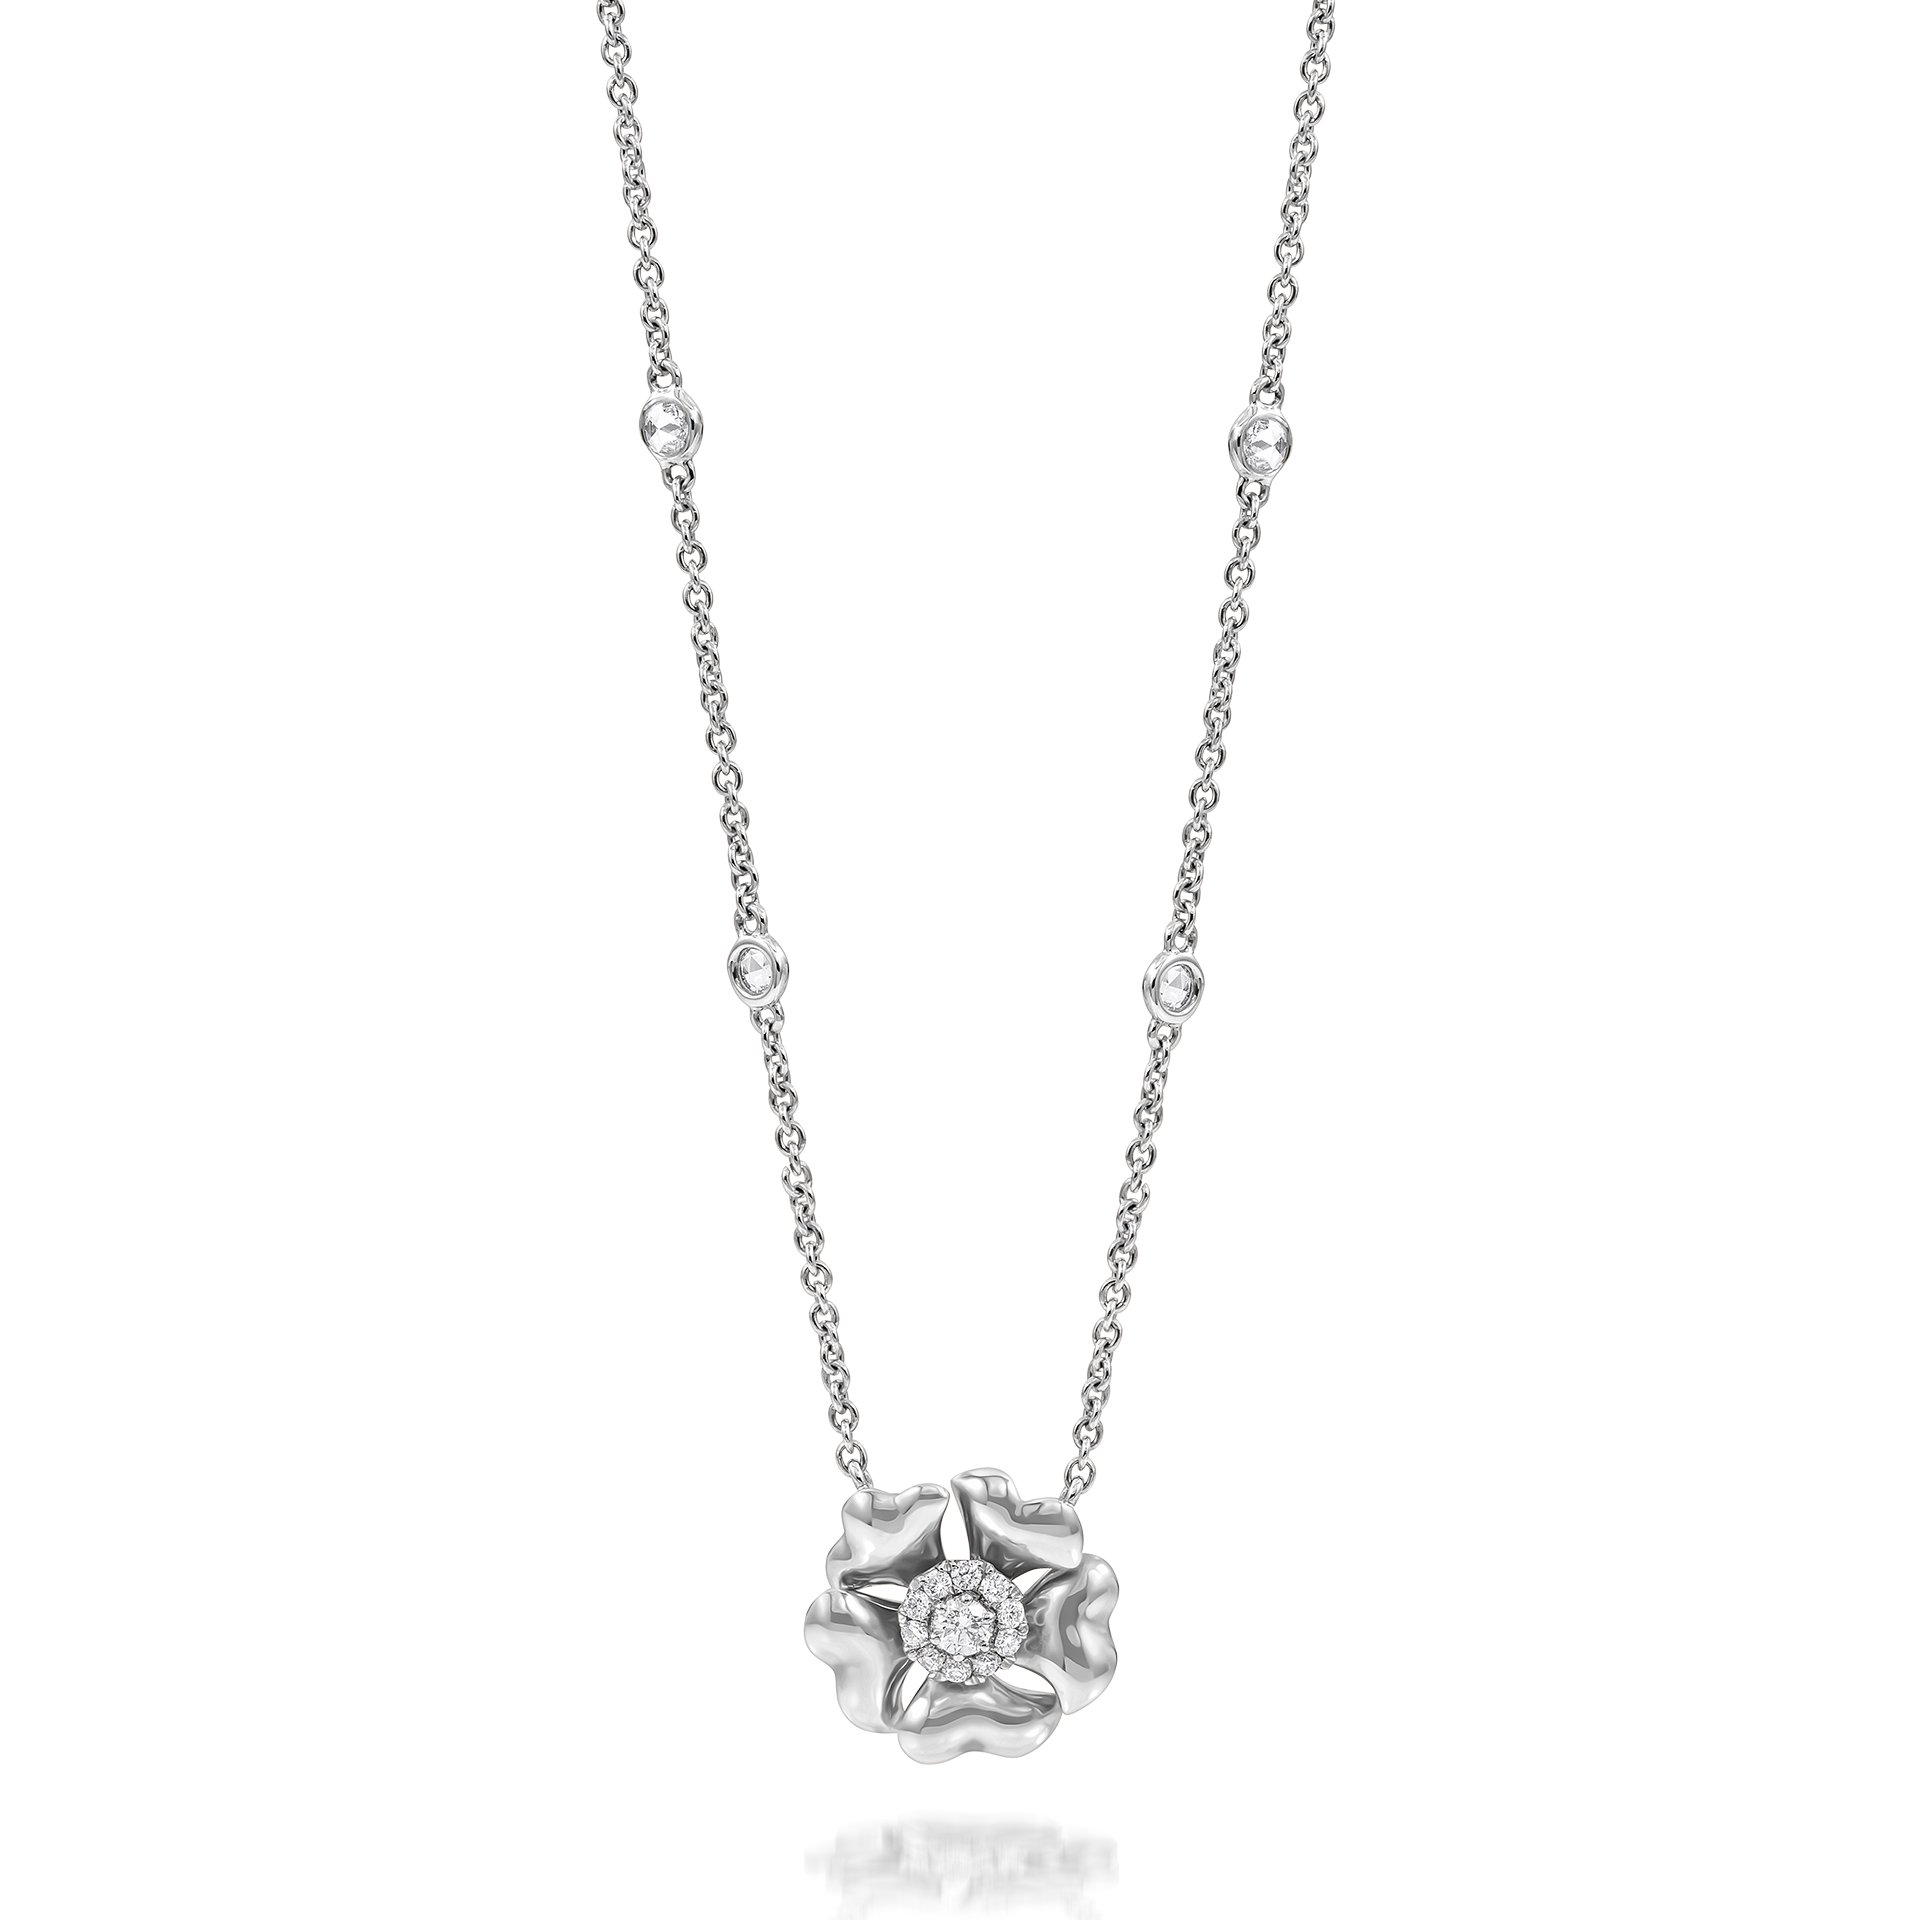 Bloom Gold and Diamond Flower Halo Necklace In 18K White Gold